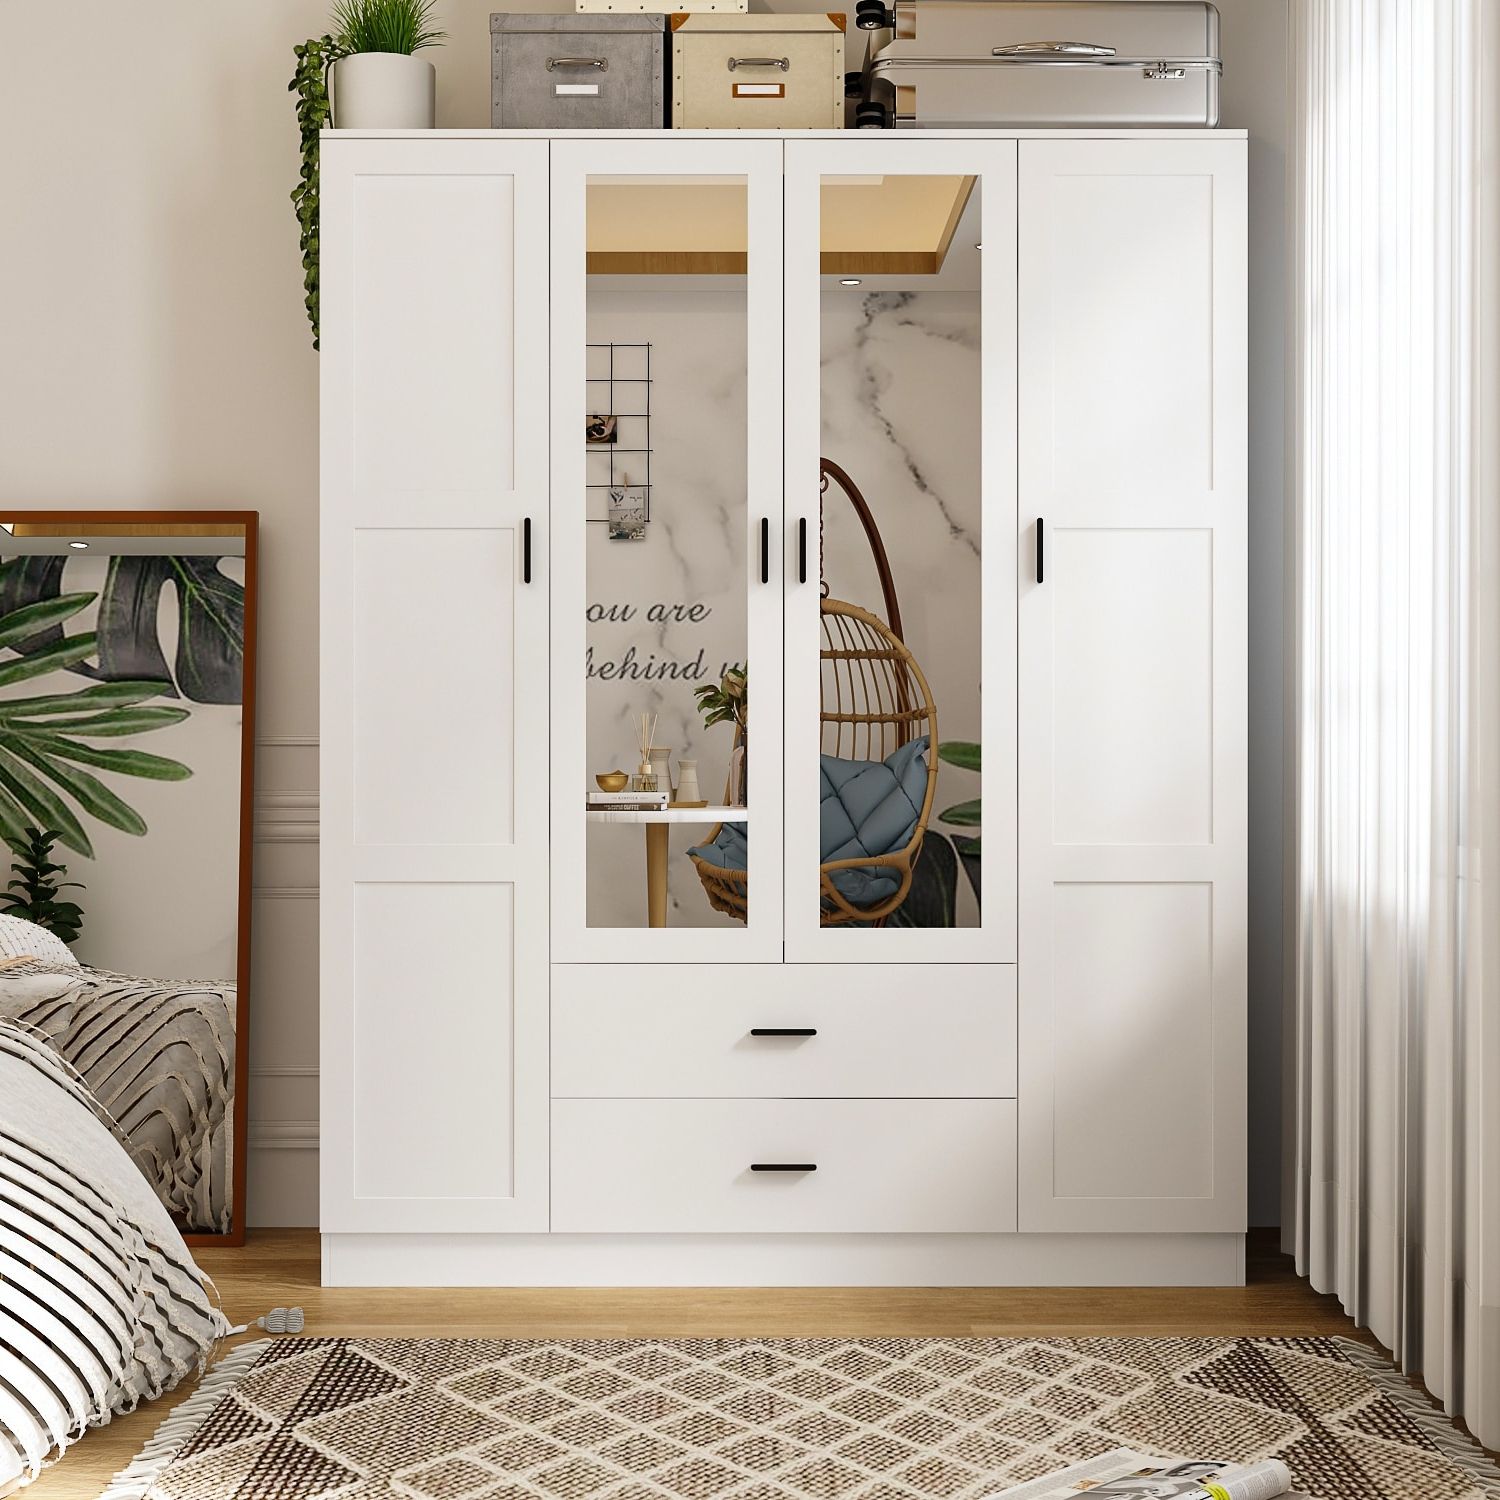 Famapy 62.9"x78.7" Armoire Wardrobes With Mirror Doors Closet Hanging – On  Sale – Bed Bath & Beyond – 36719779 Throughout White 3 Door Wardrobes With Mirror (Gallery 8 of 20)